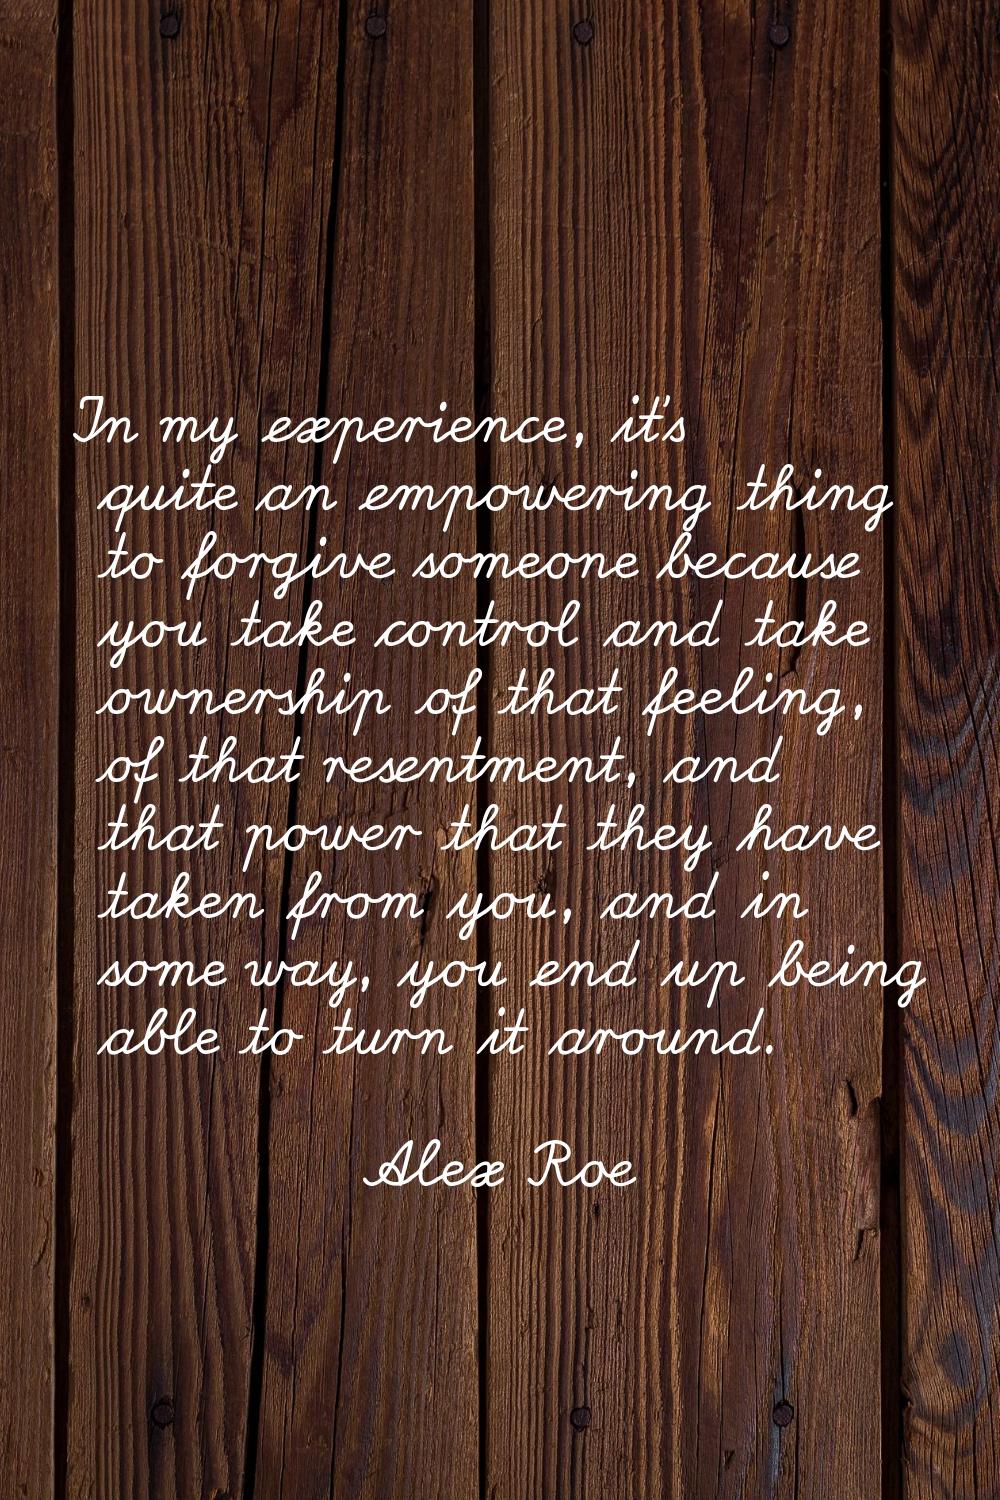 In my experience, it's quite an empowering thing to forgive someone because you take control and ta